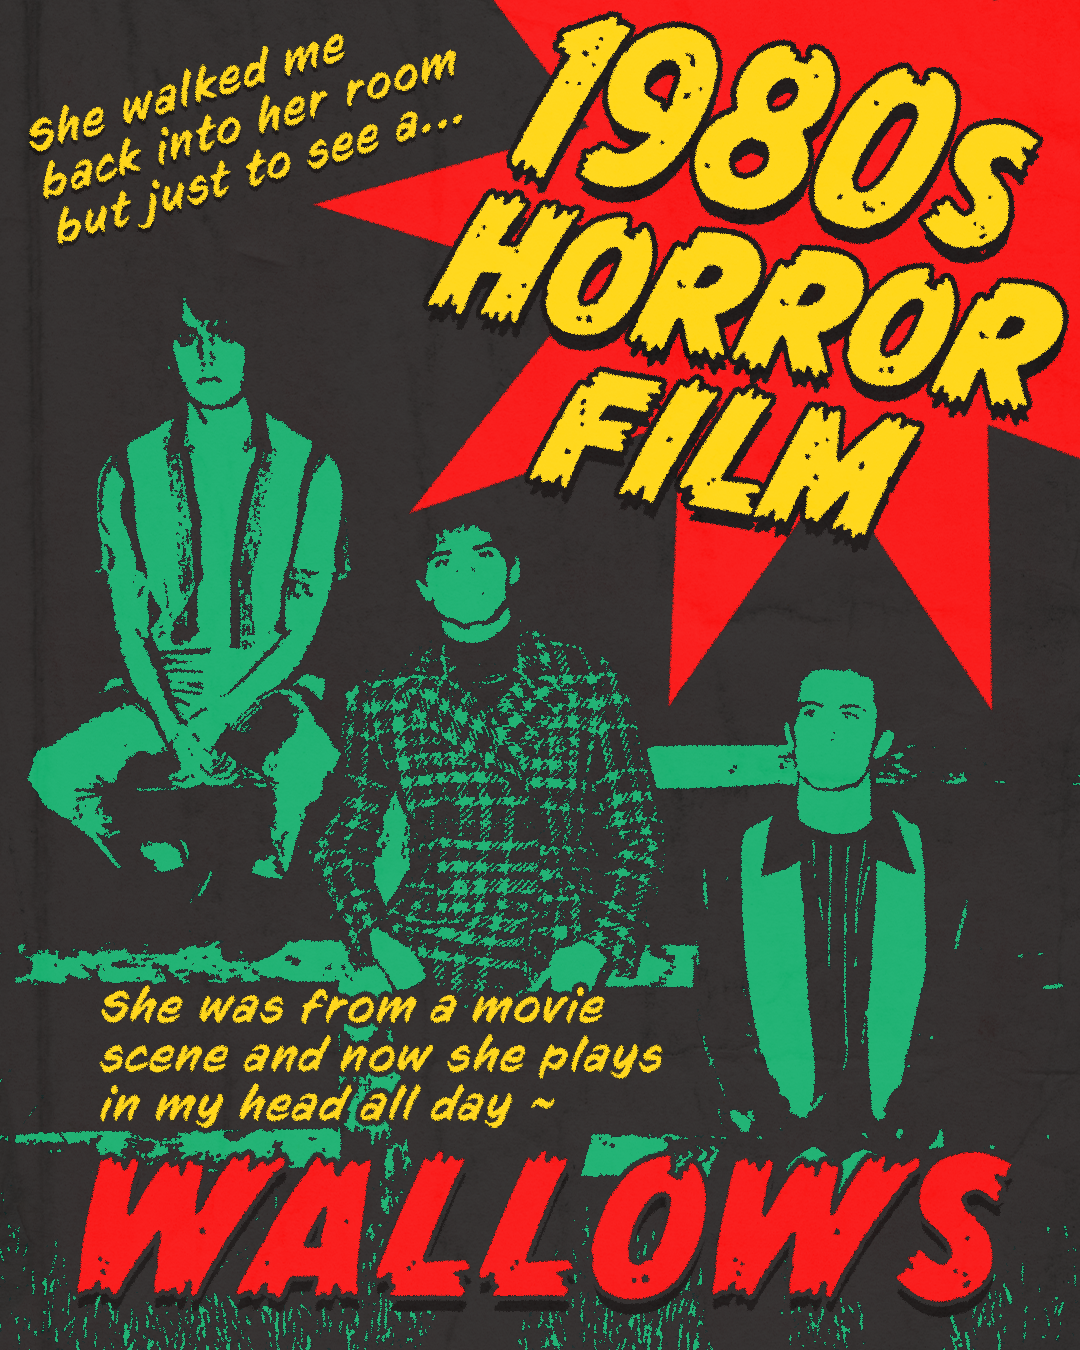 poster for the Wallows song '1980s horror film'